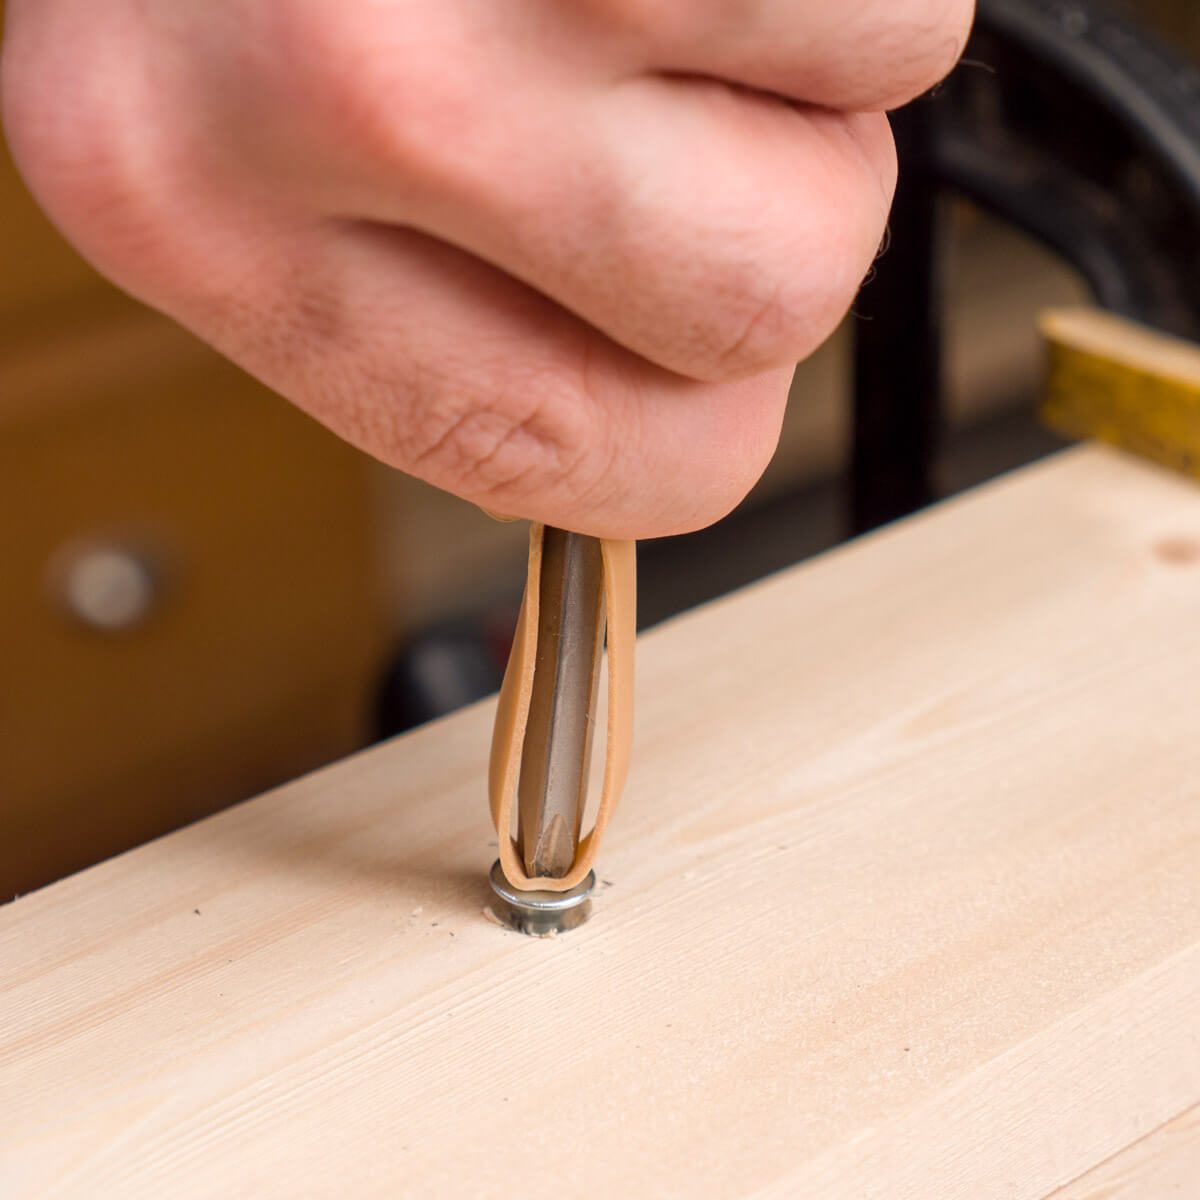 Use a Rubber Band to Grip Stripped Screws